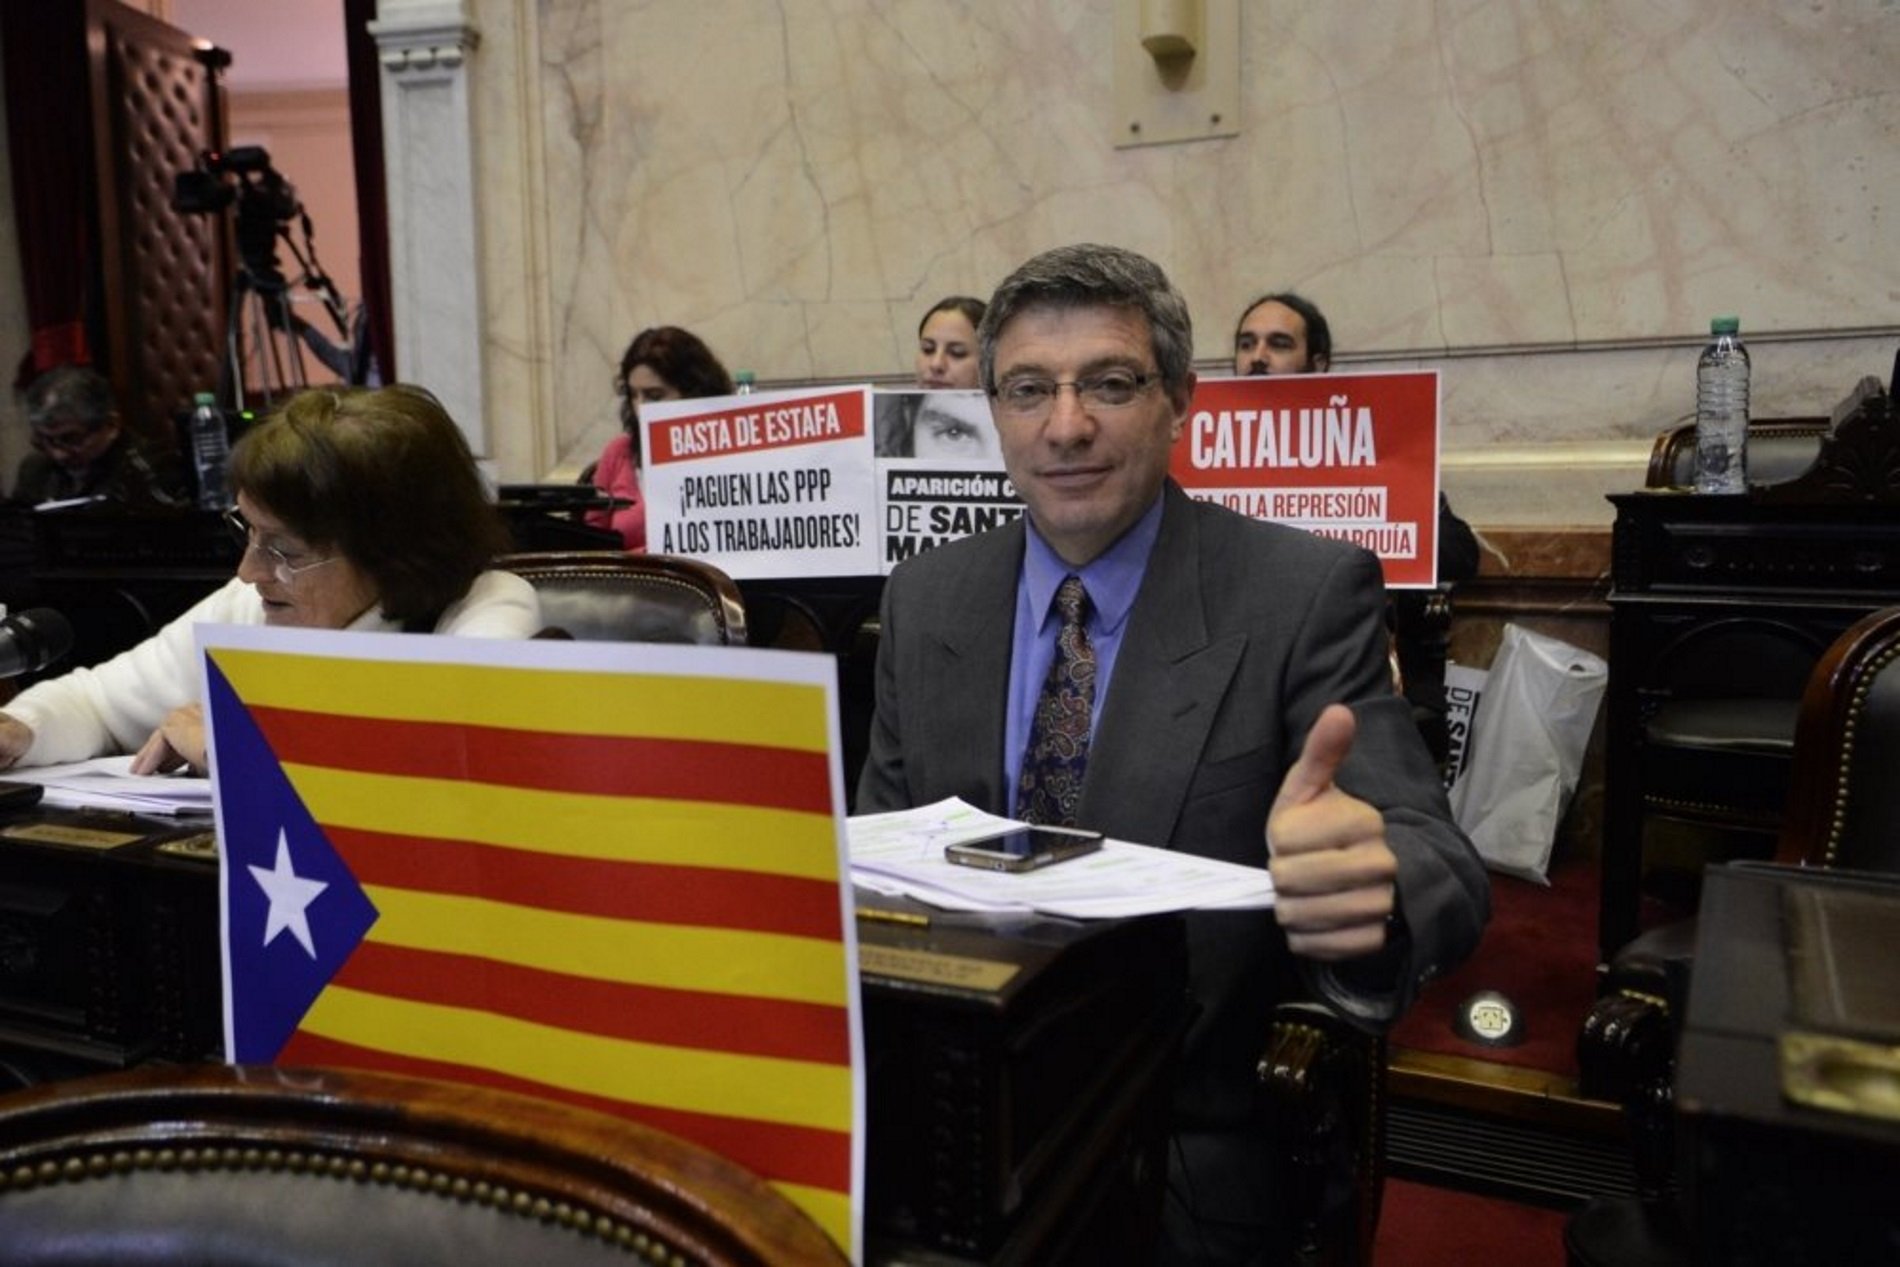 Argentinian MP to present a motion to recognise Catalonia